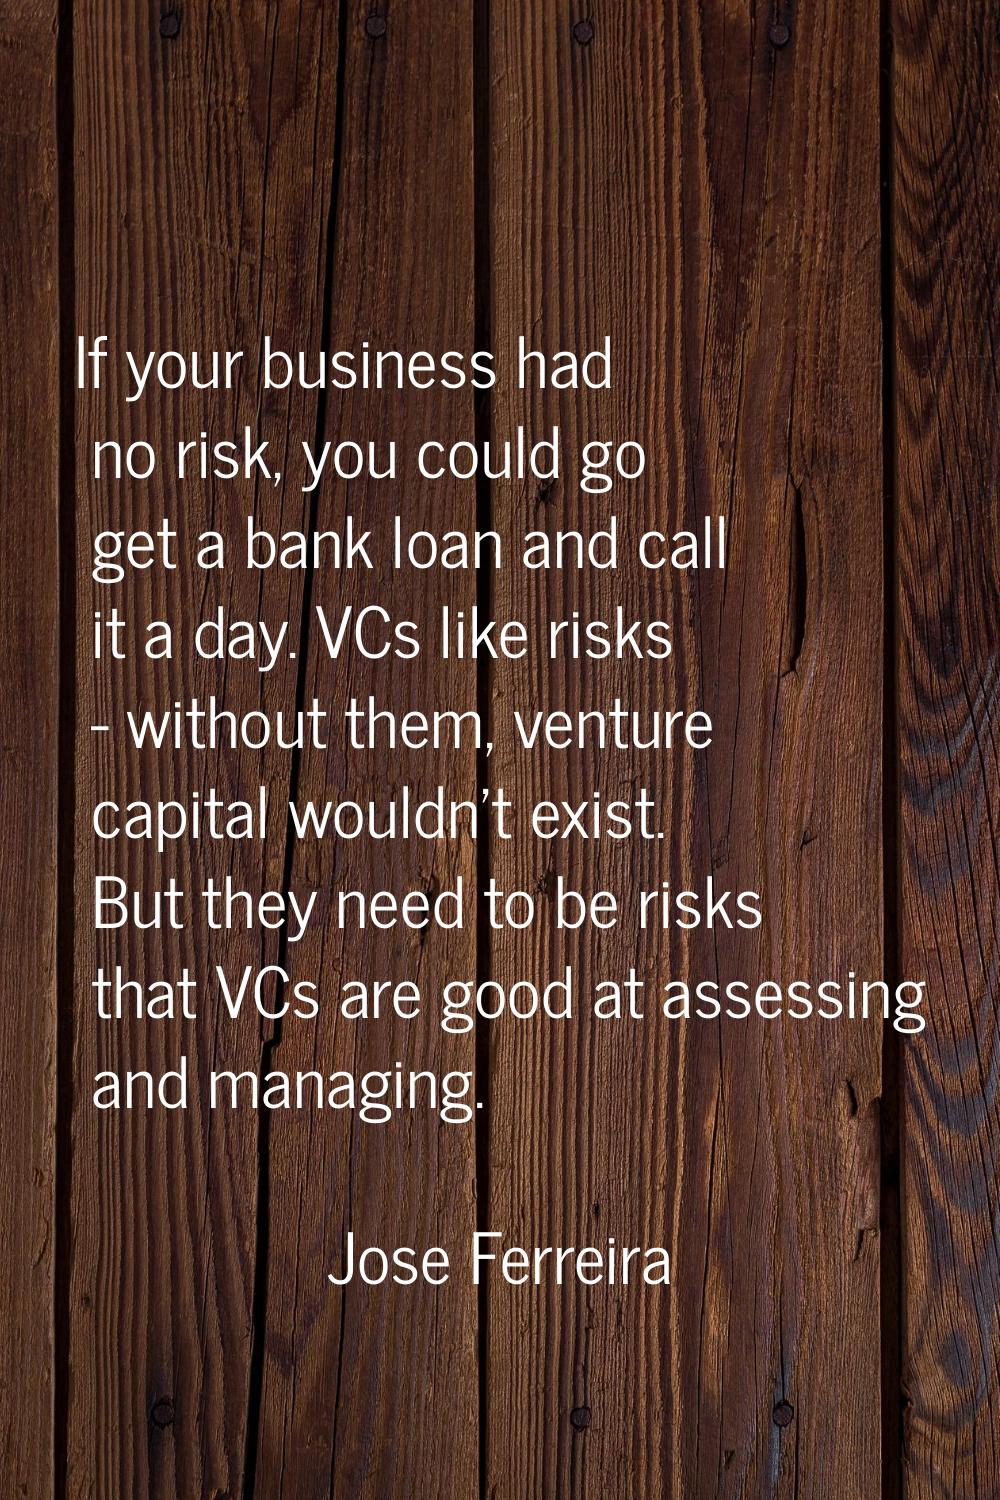 If your business had no risk, you could go get a bank loan and call it a day. VCs like risks - with